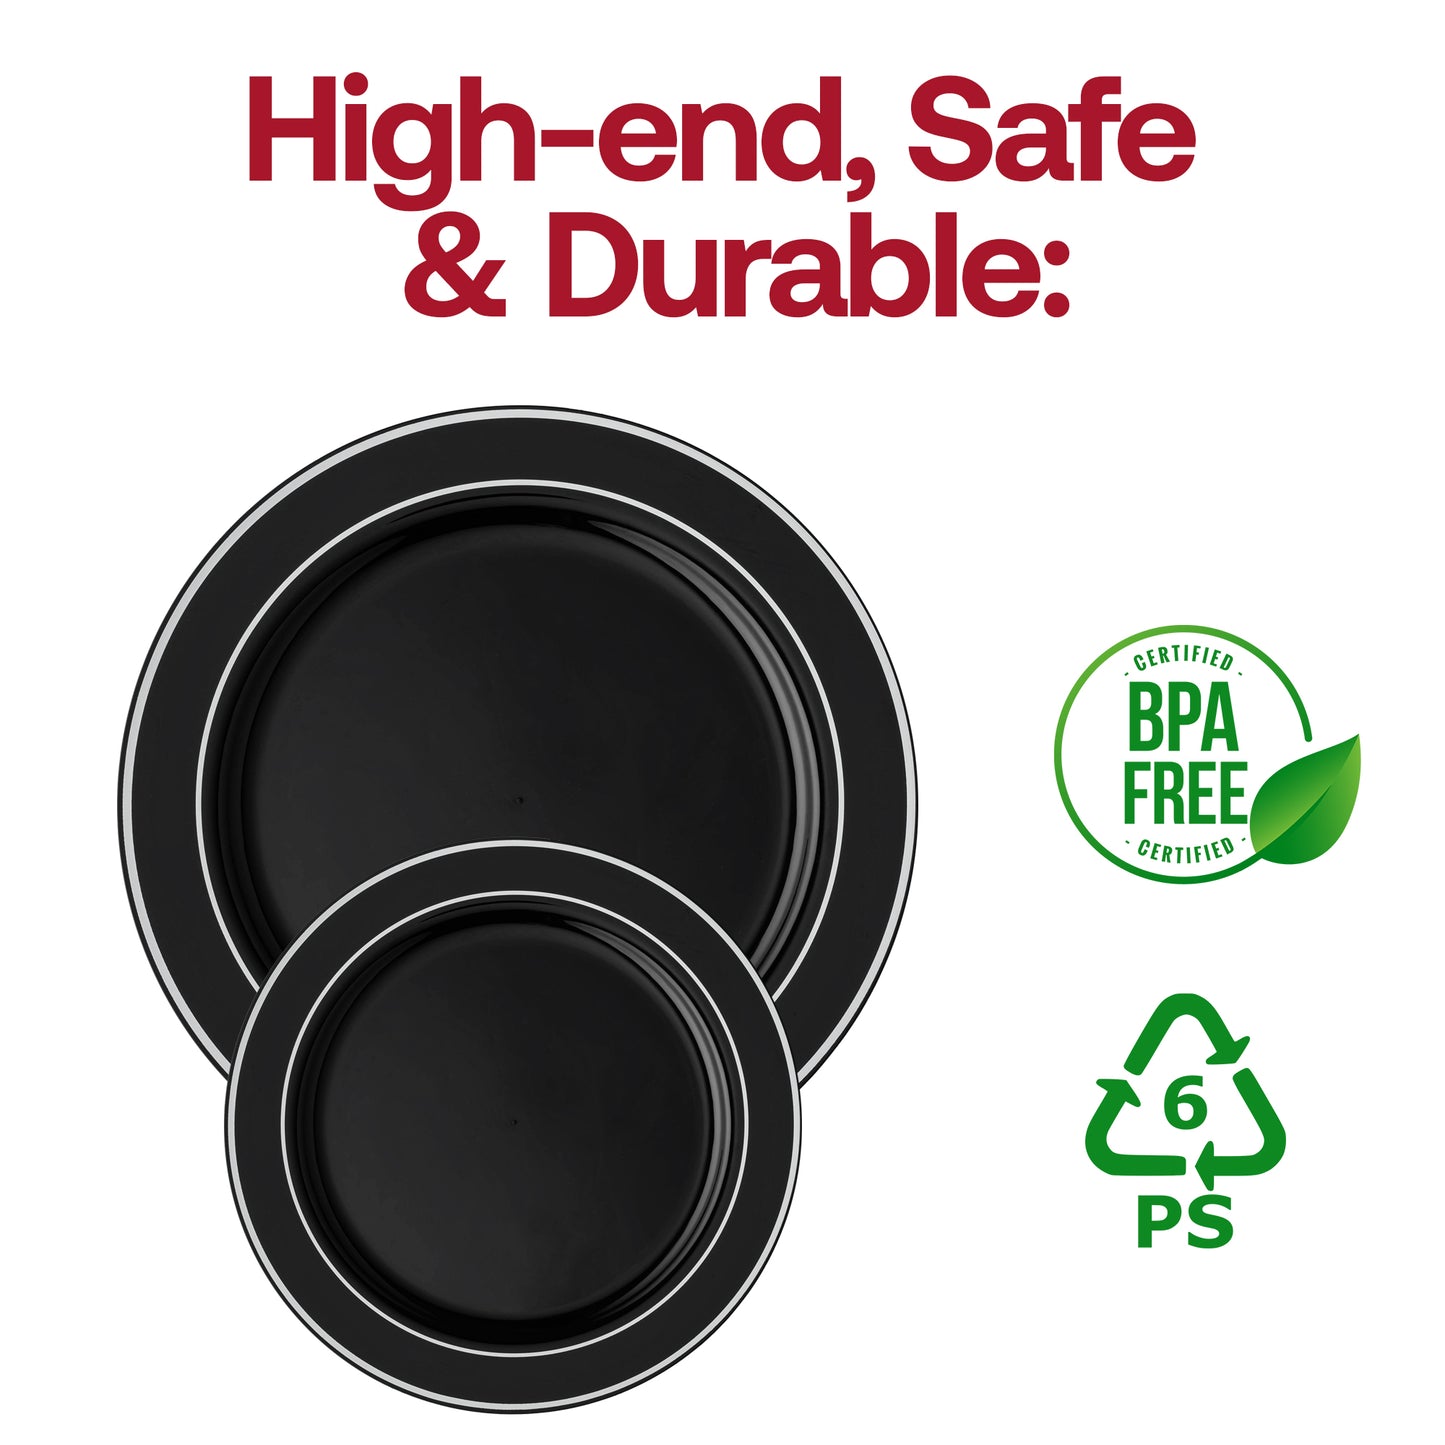 Black with Silver Edge Rim Plastic Appetizer/Salad Plates (7.5") BPA | The Kaya Collection